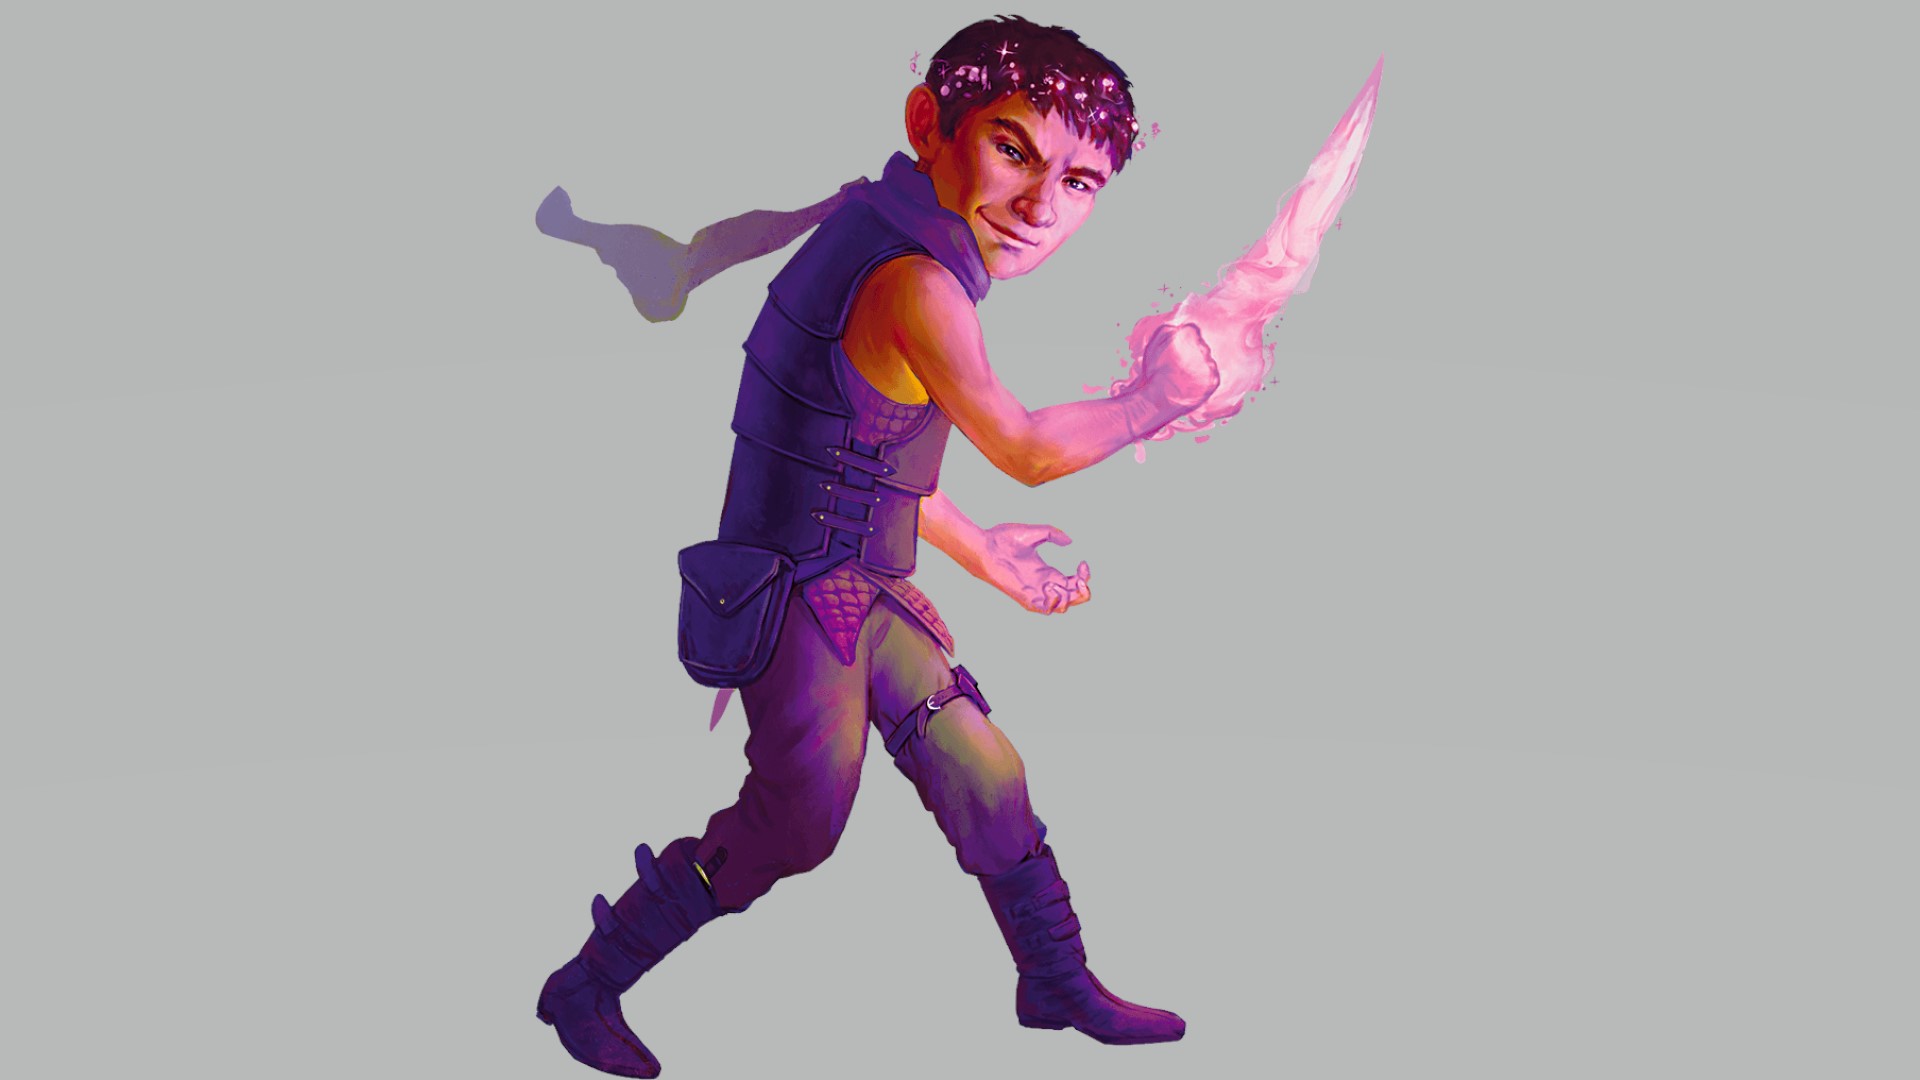 DnD Rogue 5e - Wizards of the Coast artwork showing a male halfling soulknife rogue, brandishing his soulblades